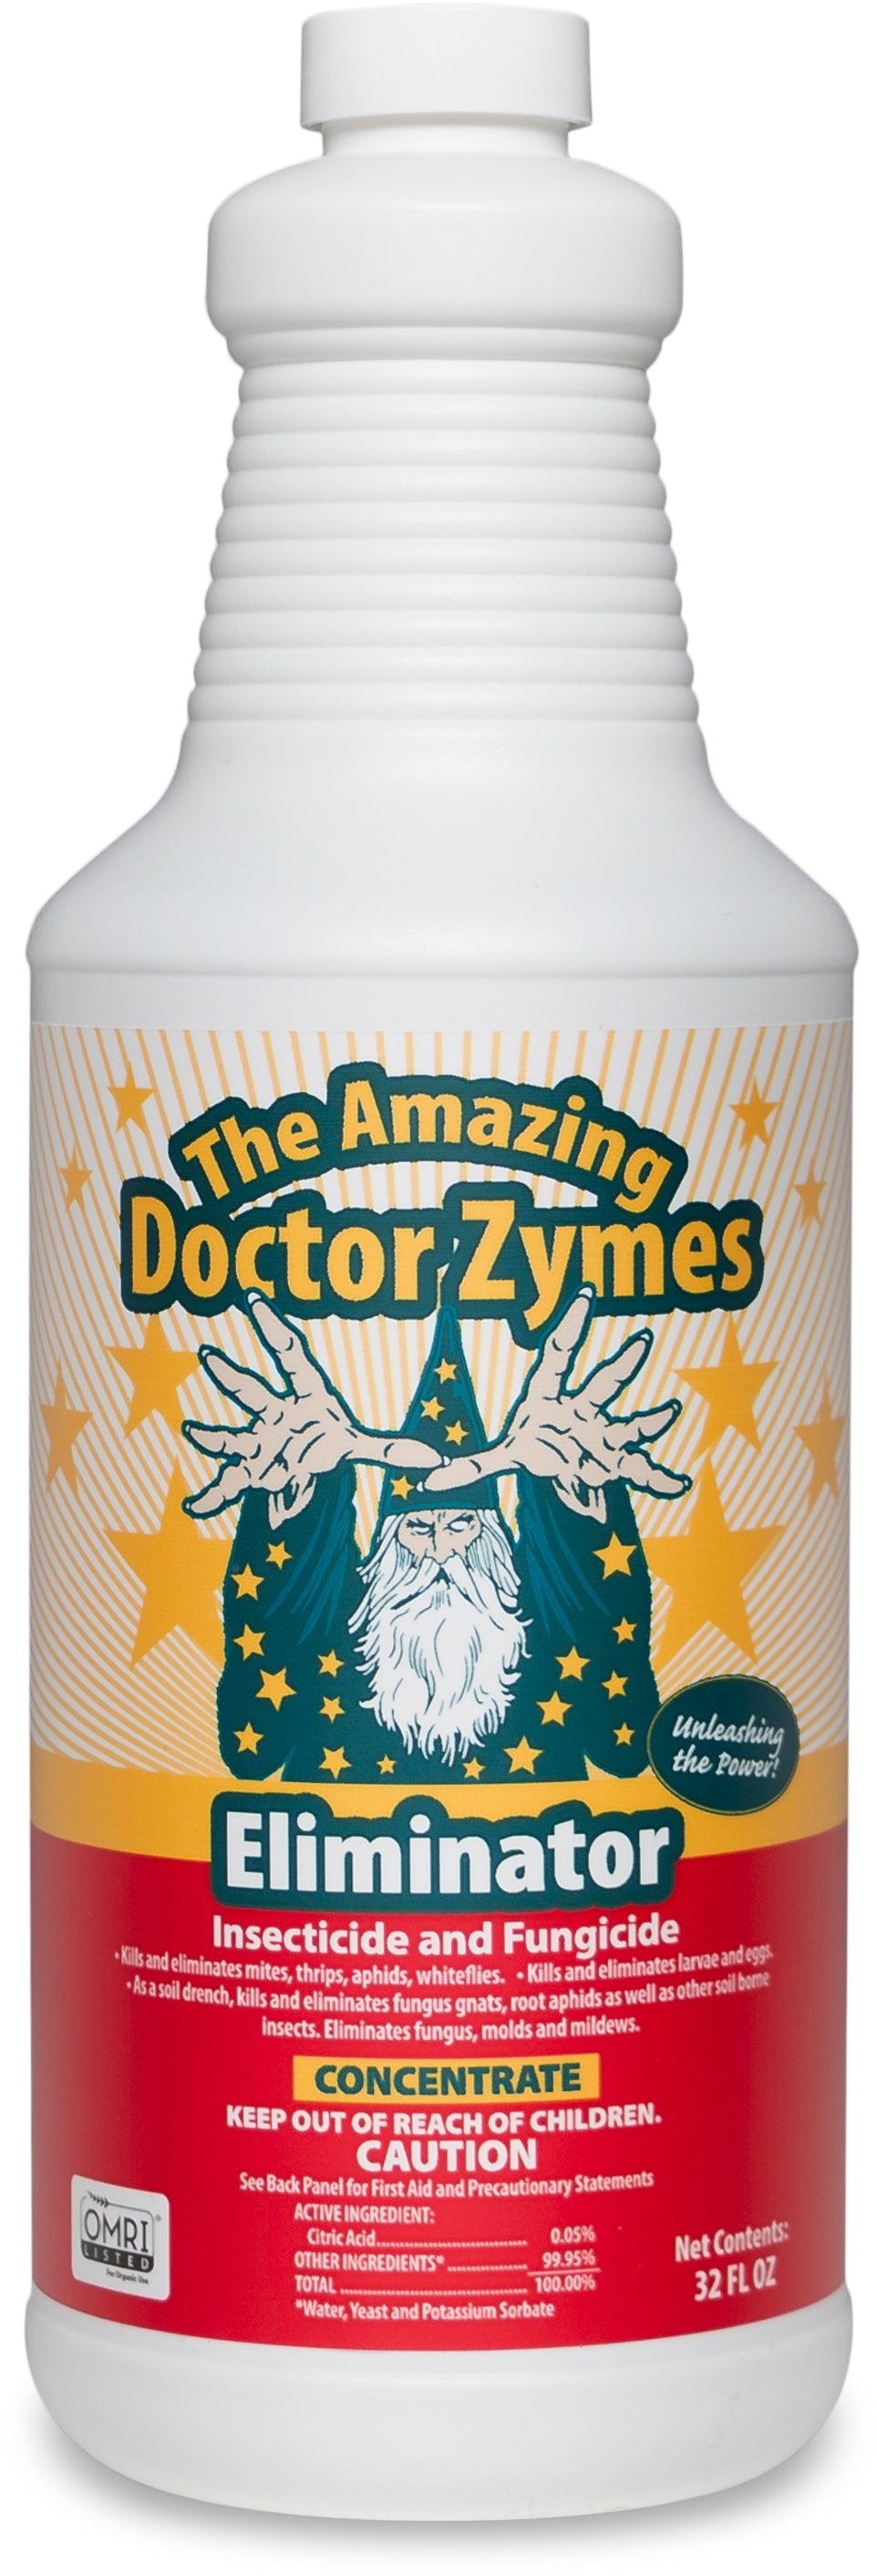 The Amazing Doctor Zymes Eliminator Concentrate